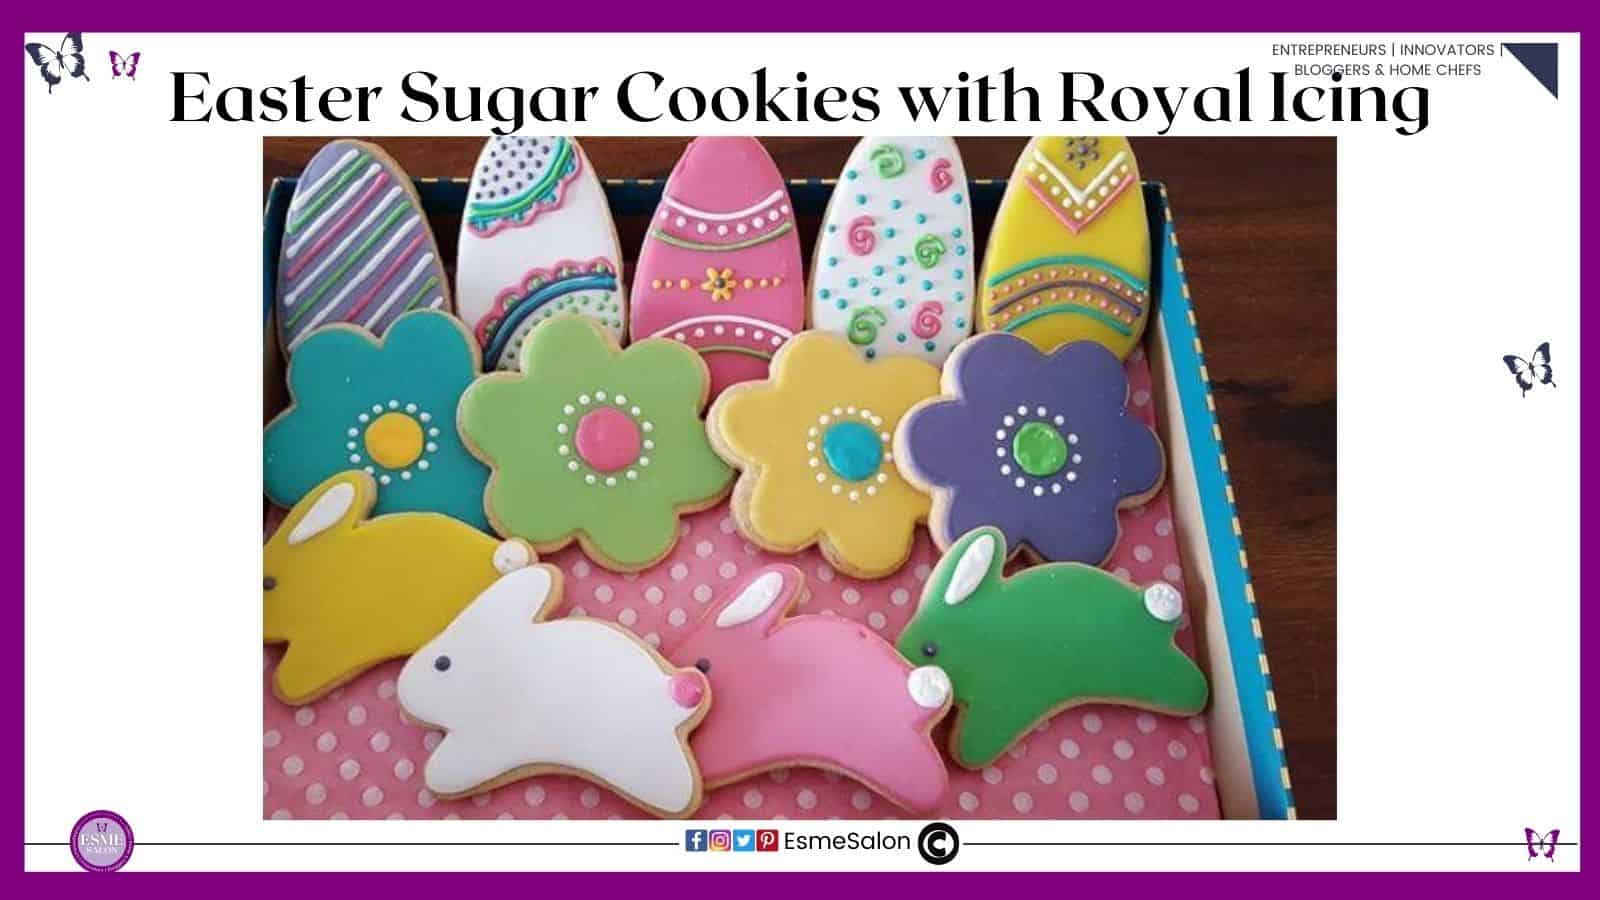 an image of egg, flower and bunny shaped Easter Sugar Cookies with Royal Icing